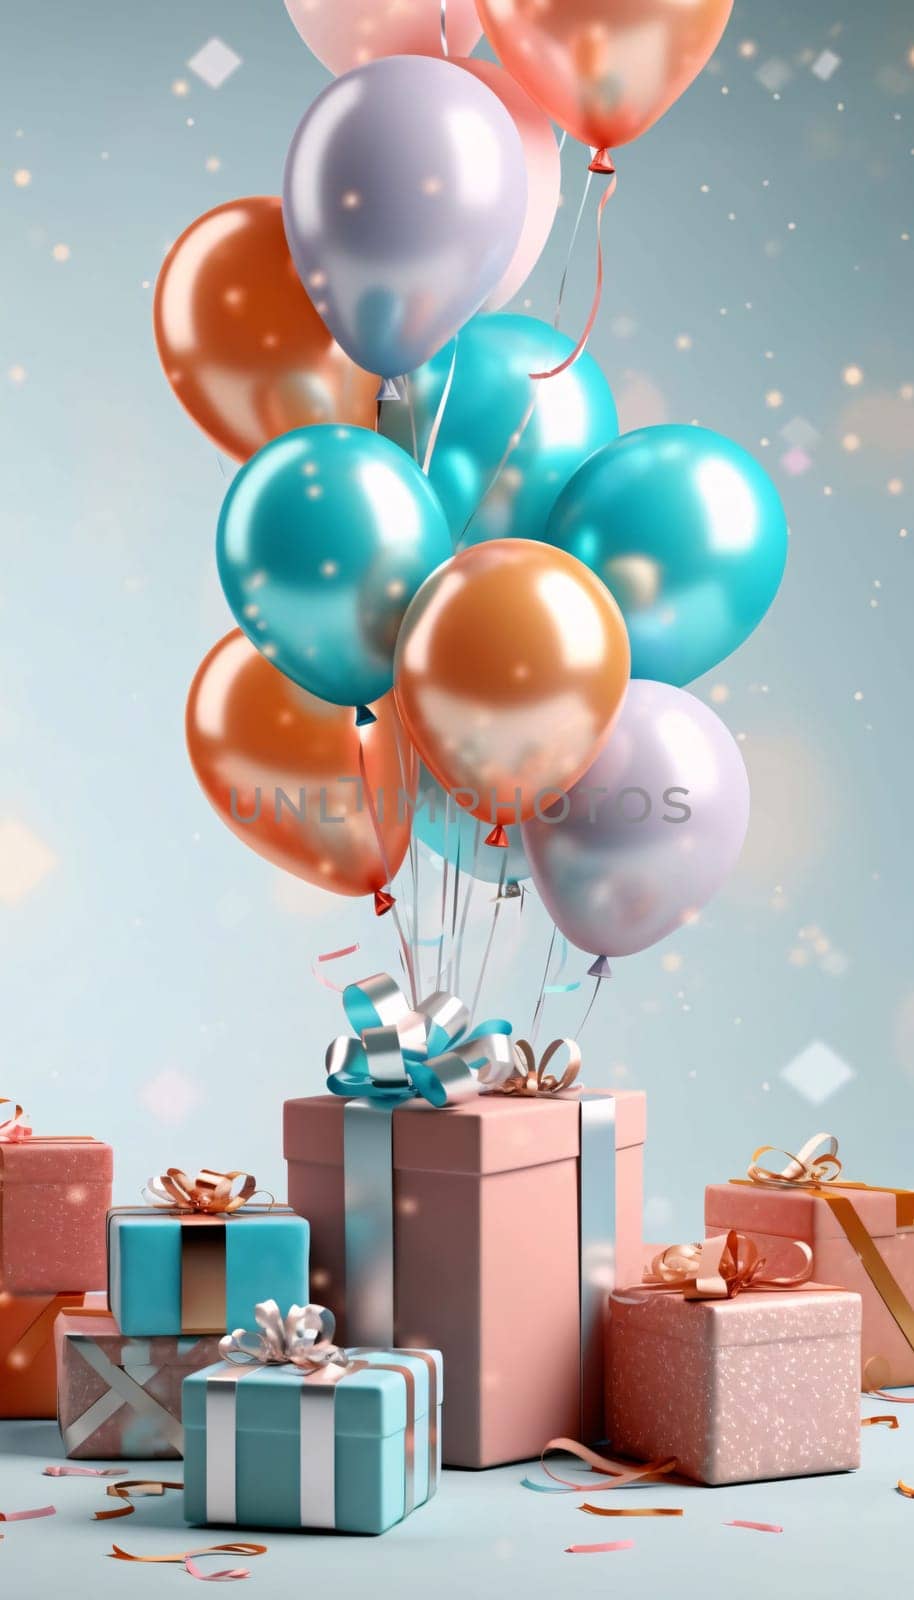 White and orange balloons and gifts with bow, confetti, bright background.Valentine's Day banner with space for your own content. Heart as a symbol of affection and love.